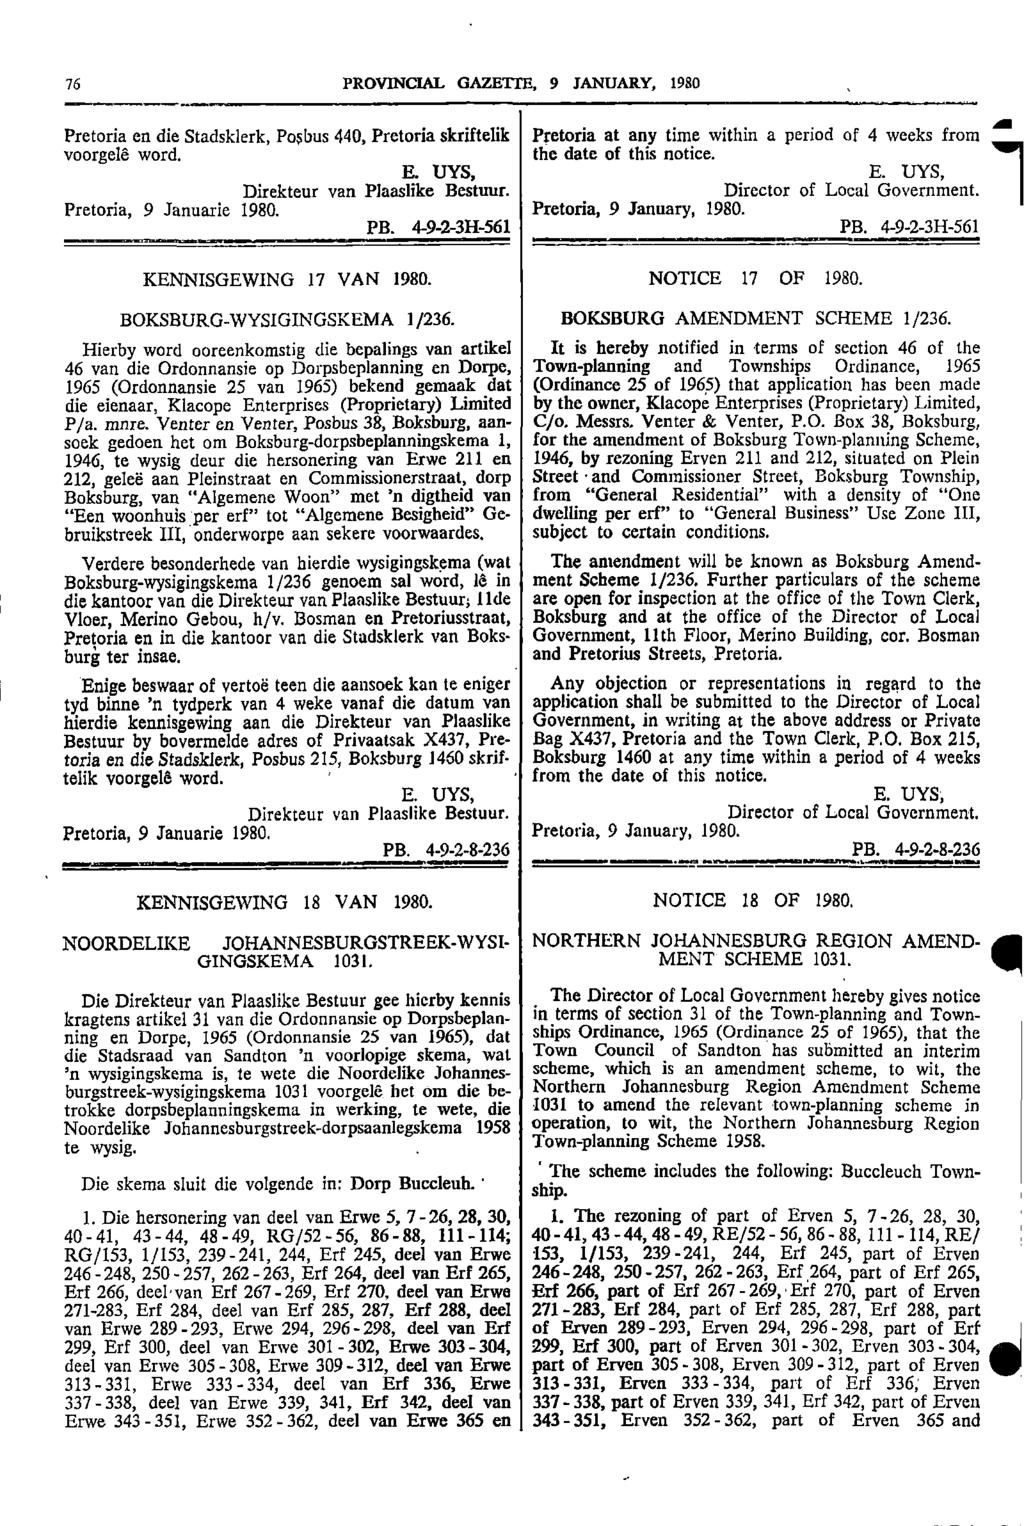 76 PROVNCAL GAZETTE 9 JANUARY 980 Pretoria en die Stadsklerk Posbus 440 Pretoria skriftelik Pretoria at any time within a a period of 4 weeks from voorgele word the date of this notice UYS E UYS